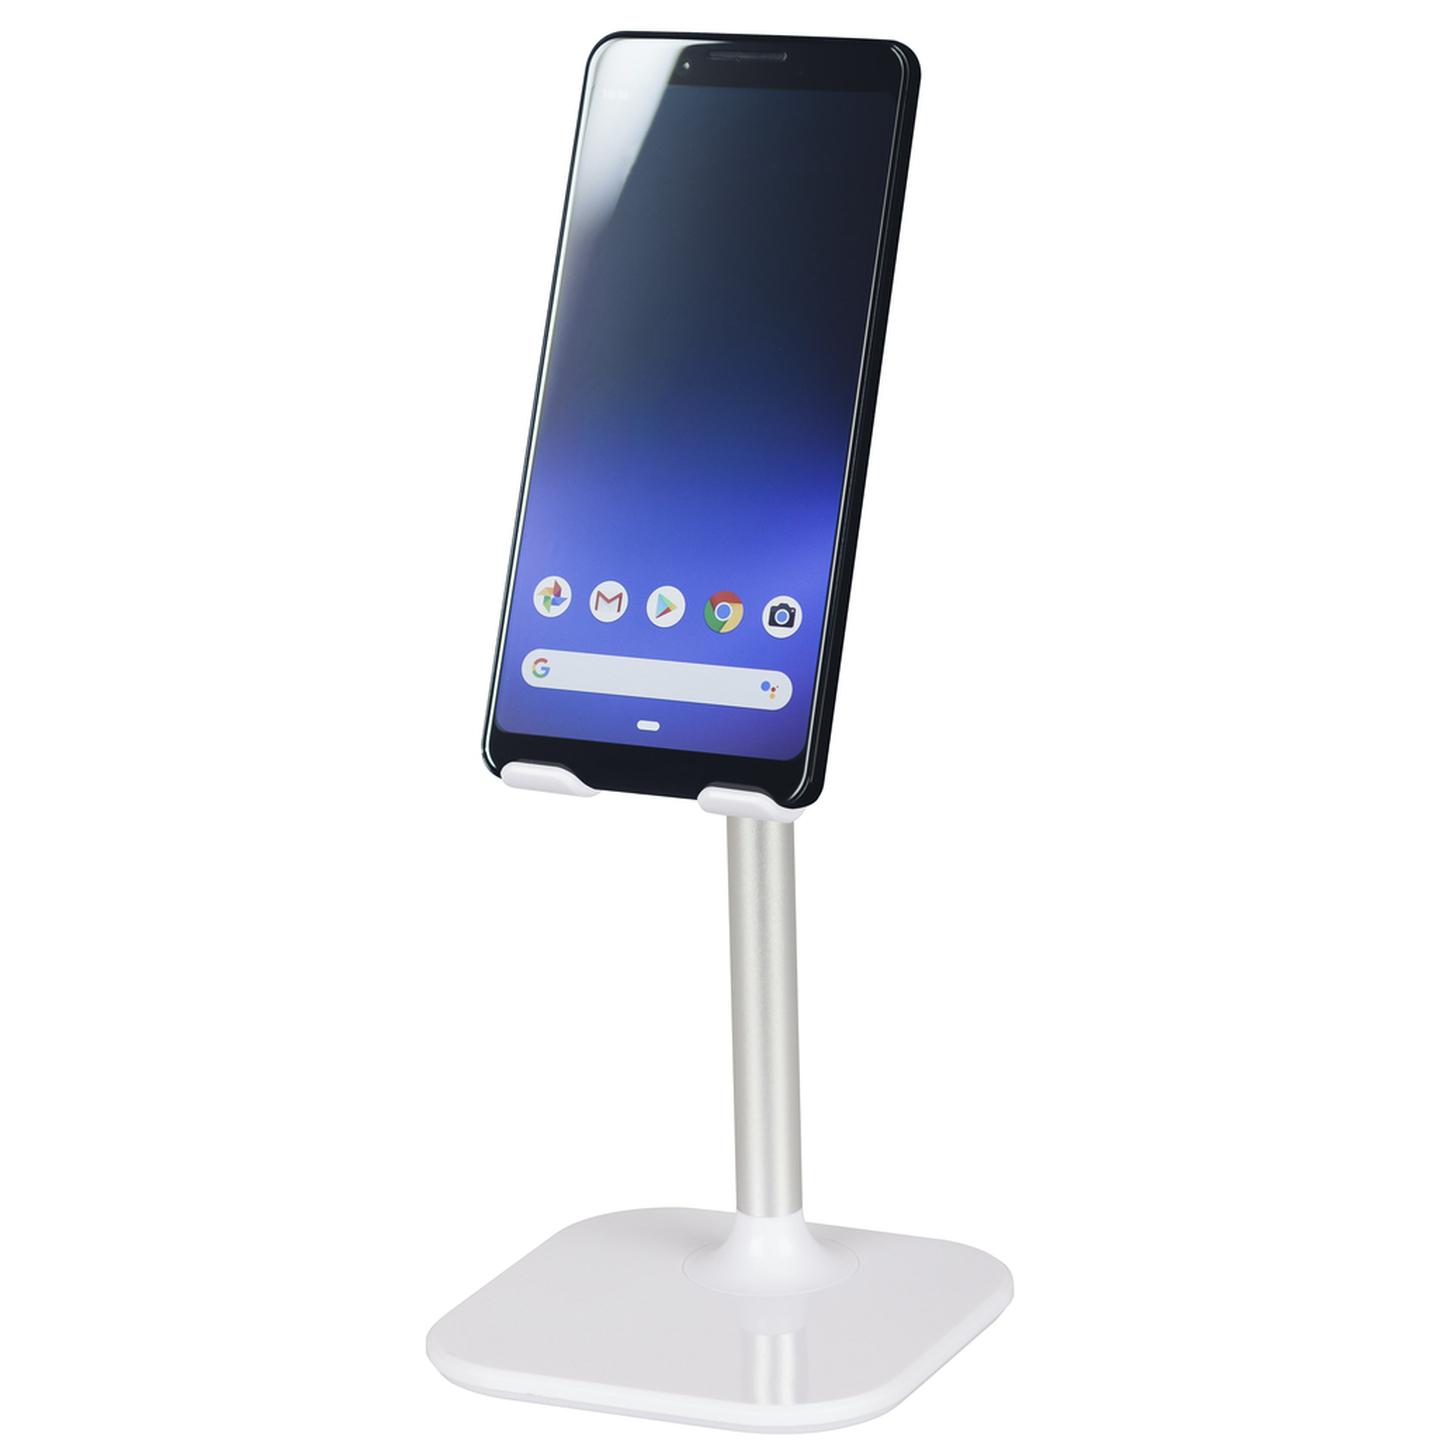 Universal Tablet and Phone Desk Stand